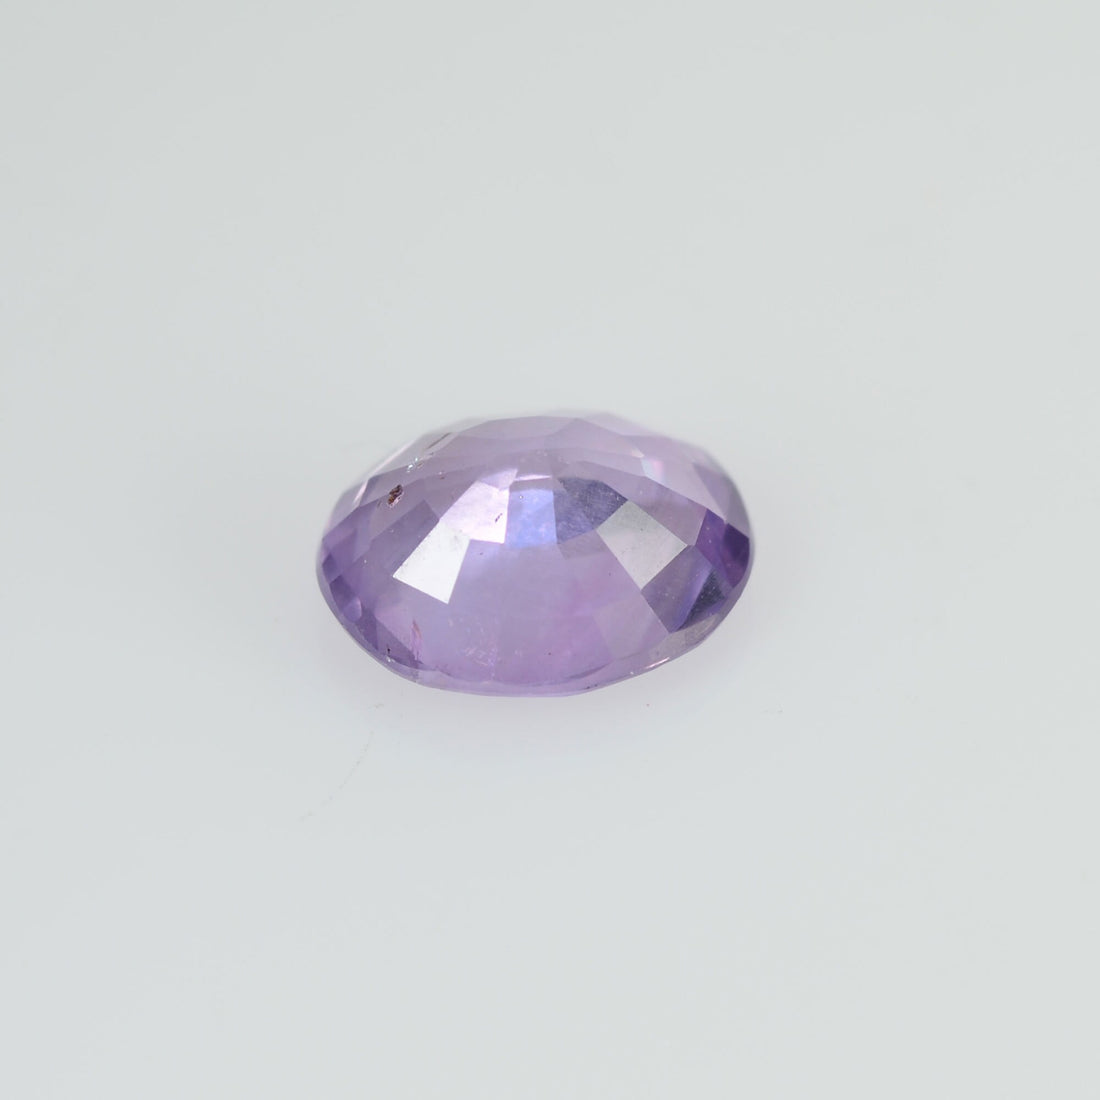 0.55 cts Natural Lavender Sapphire Loose Gemstone Oval Cut